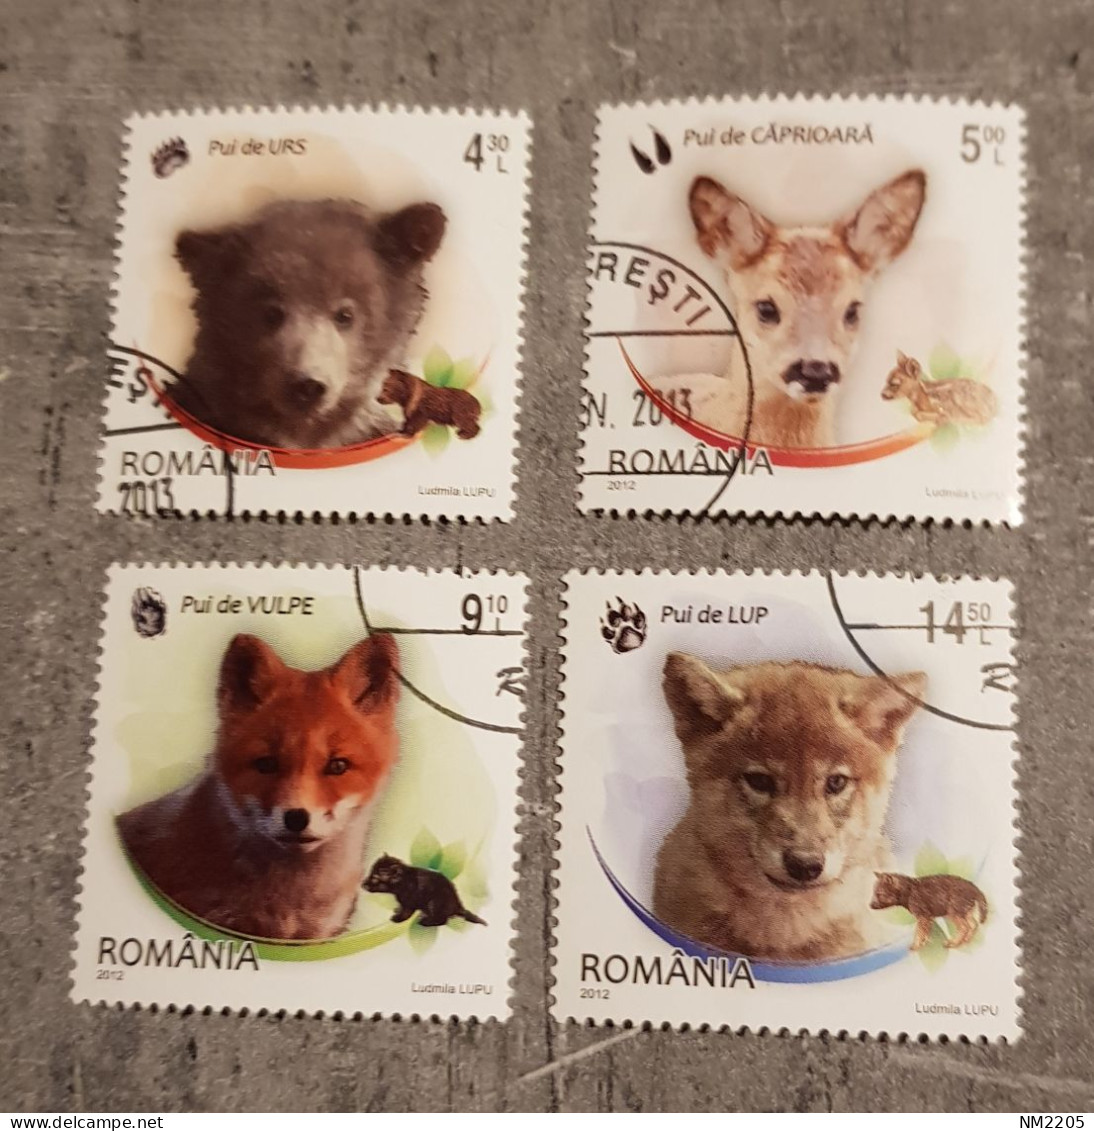 ROMANIA WILD CUBS SET CTO- USED - Used Stamps